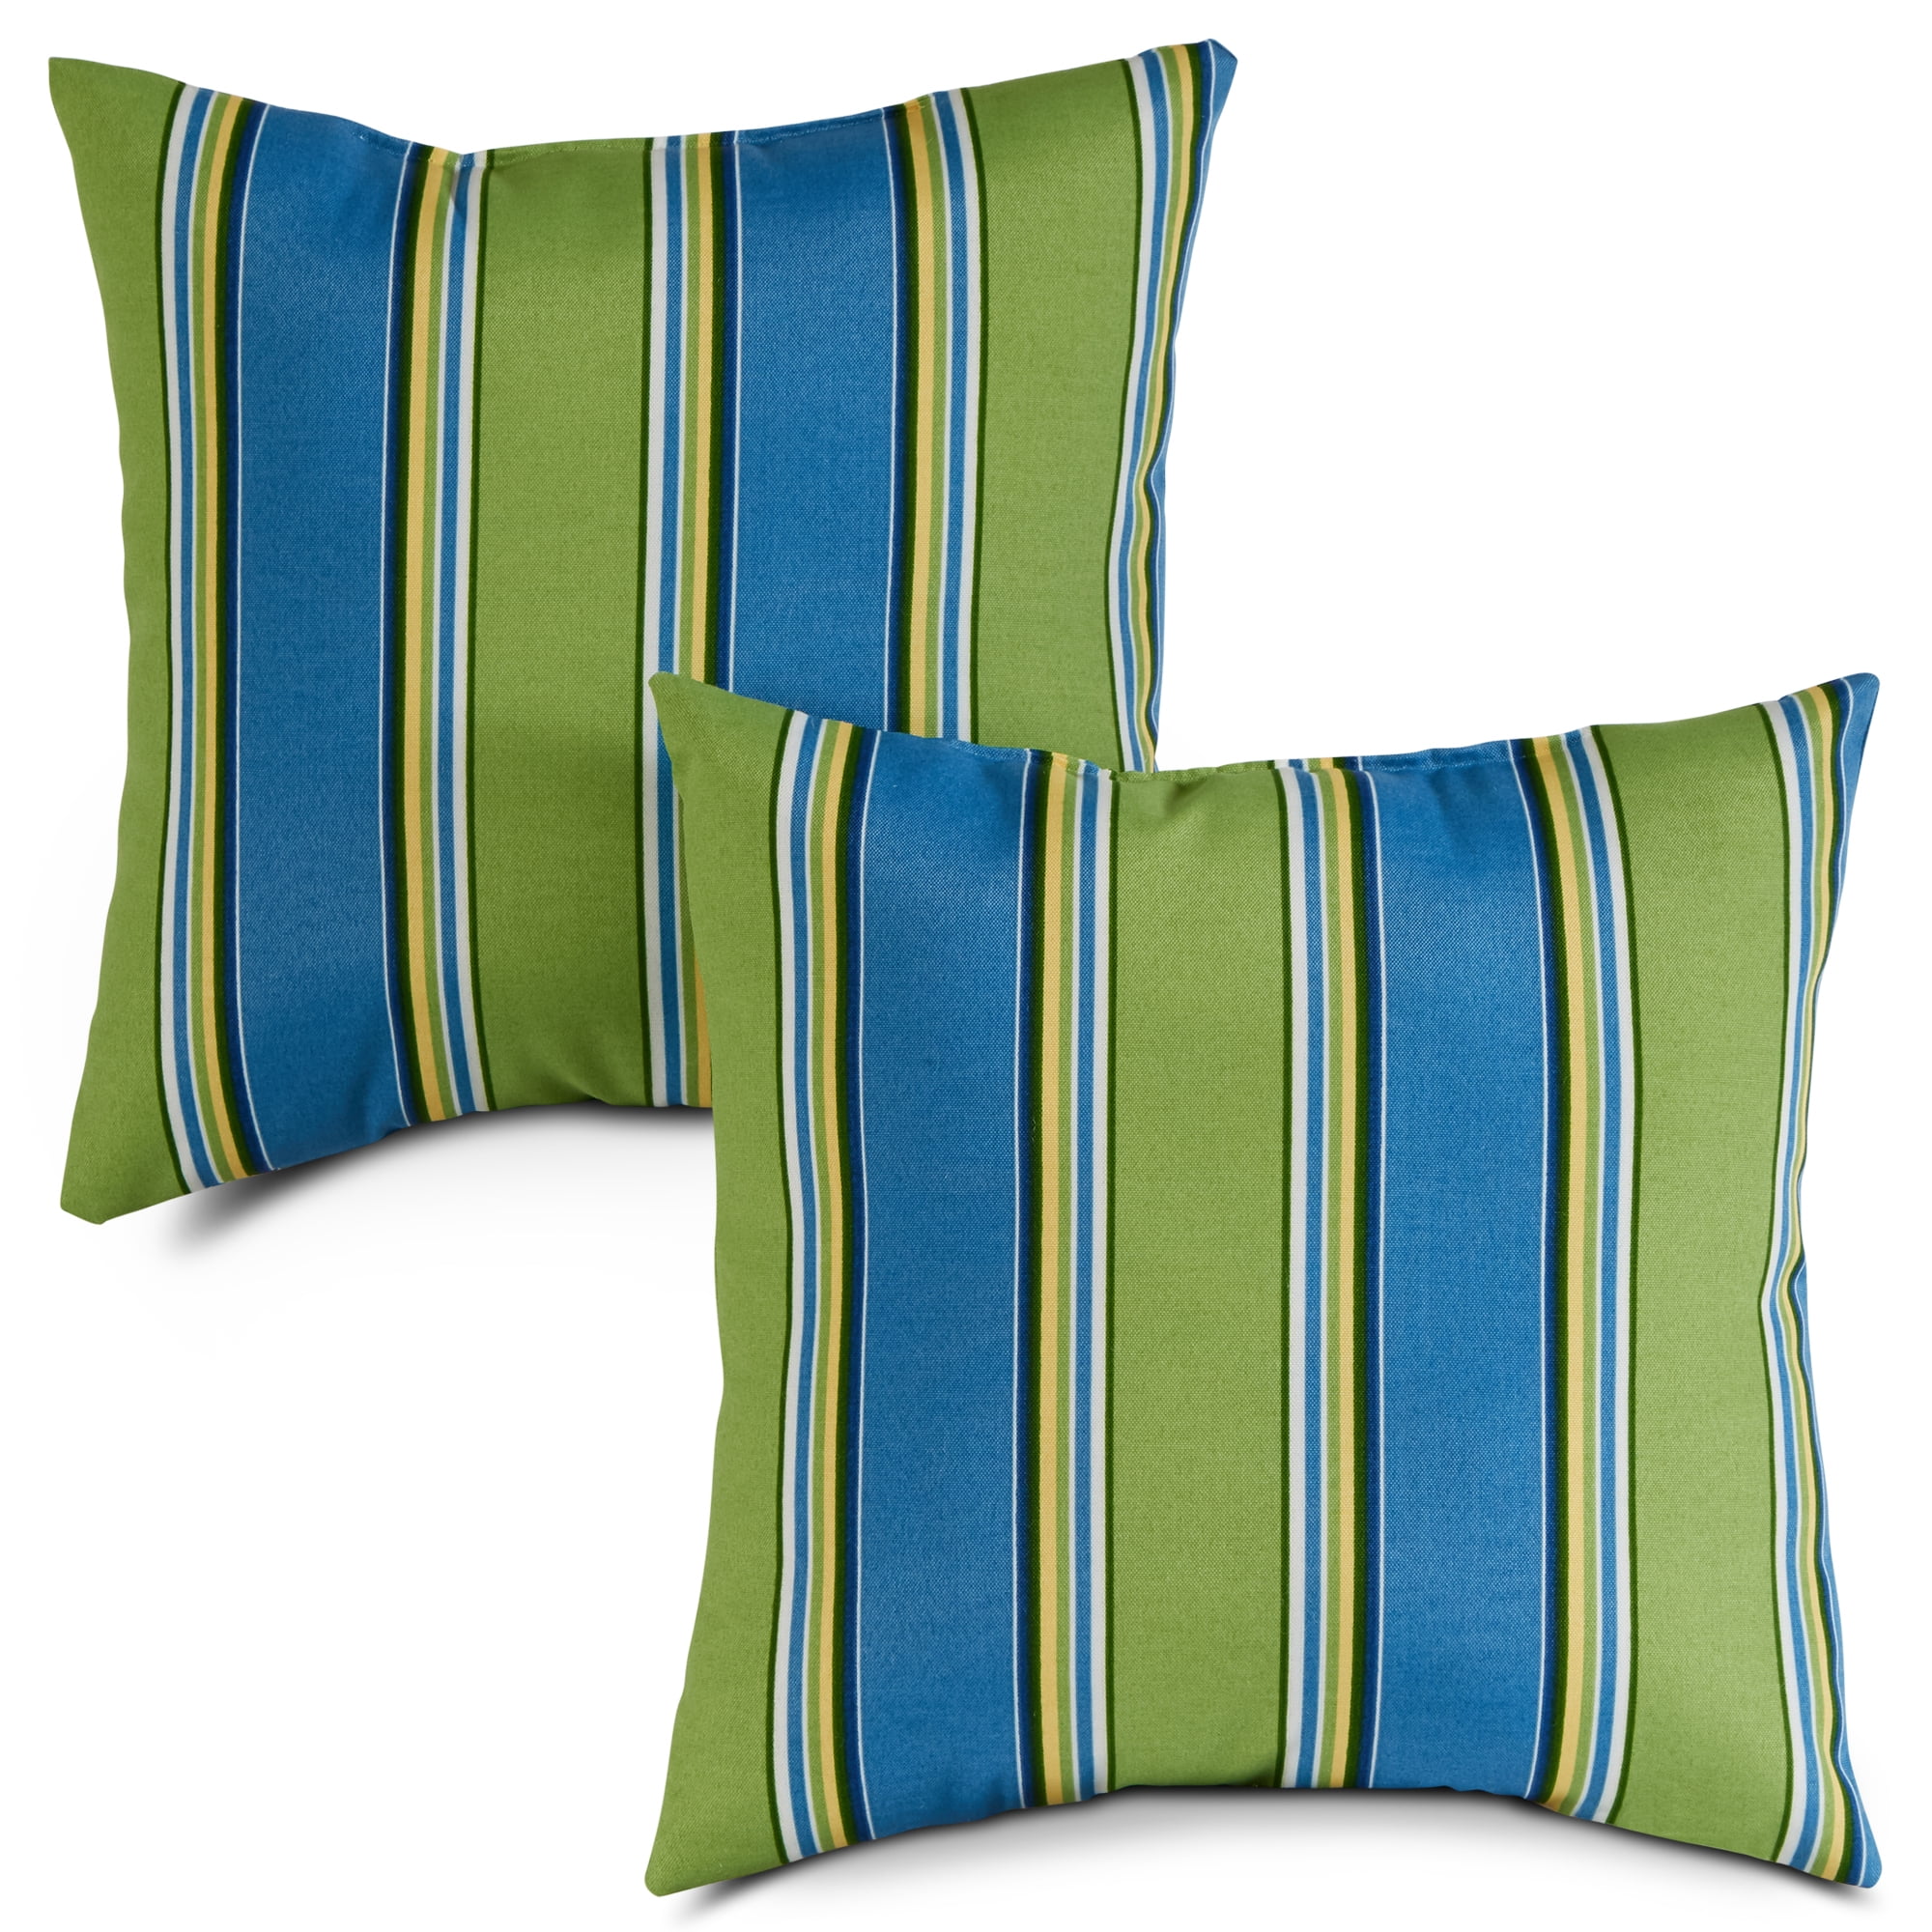 Cayman Stripe Transitional 17" Square Outdoor Throw Pillow Set